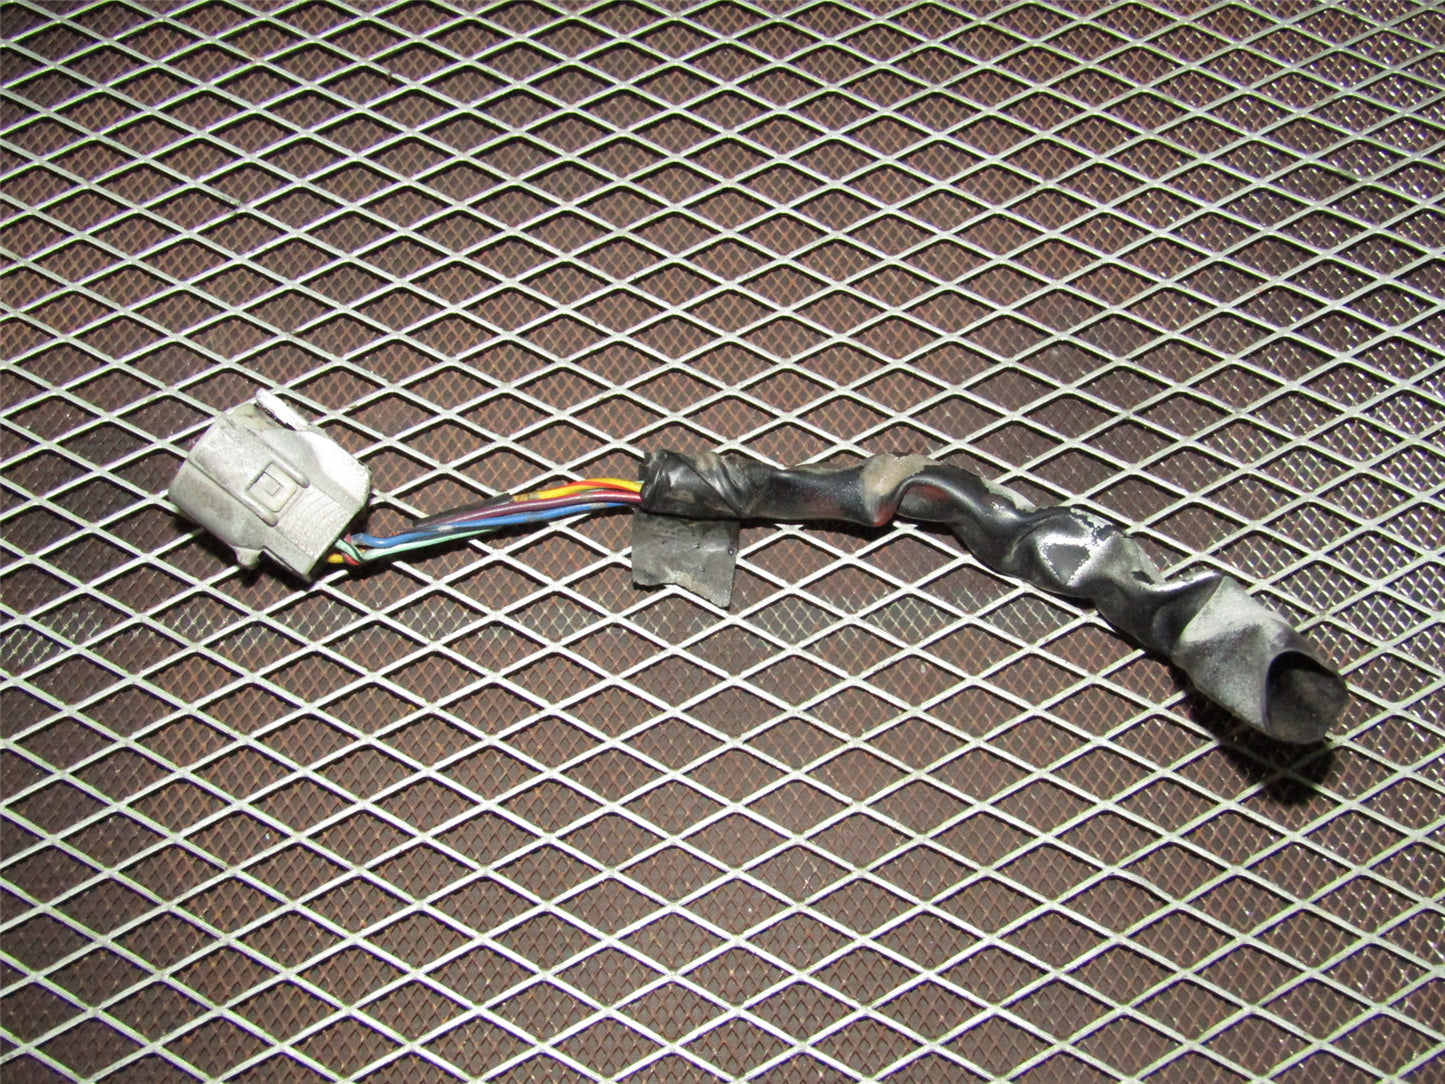 94 95 96 97 98 99 Toyota Celica OEM A/C Pressure Switch Pigtail Harness